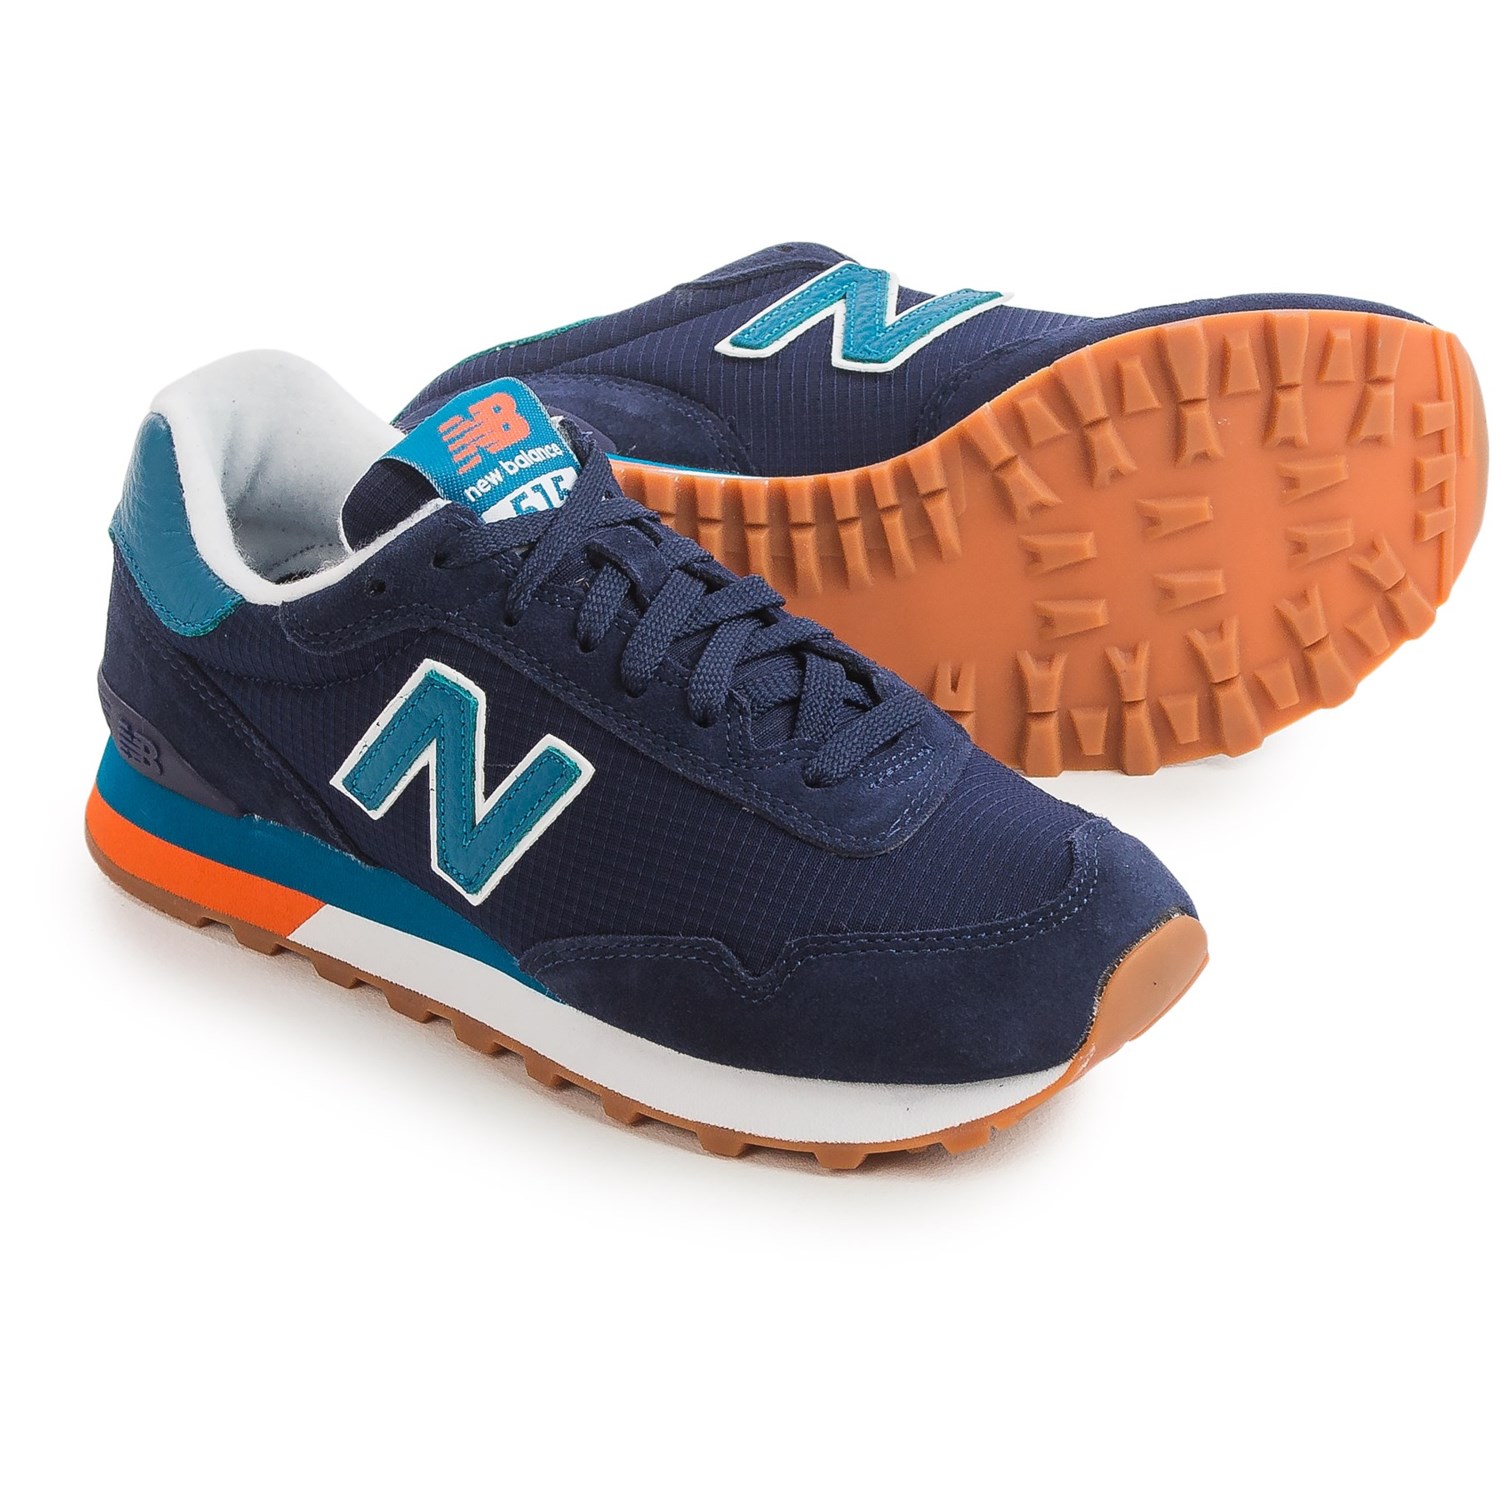 New Balance 515 Sneakers (For Men) - Save 42%